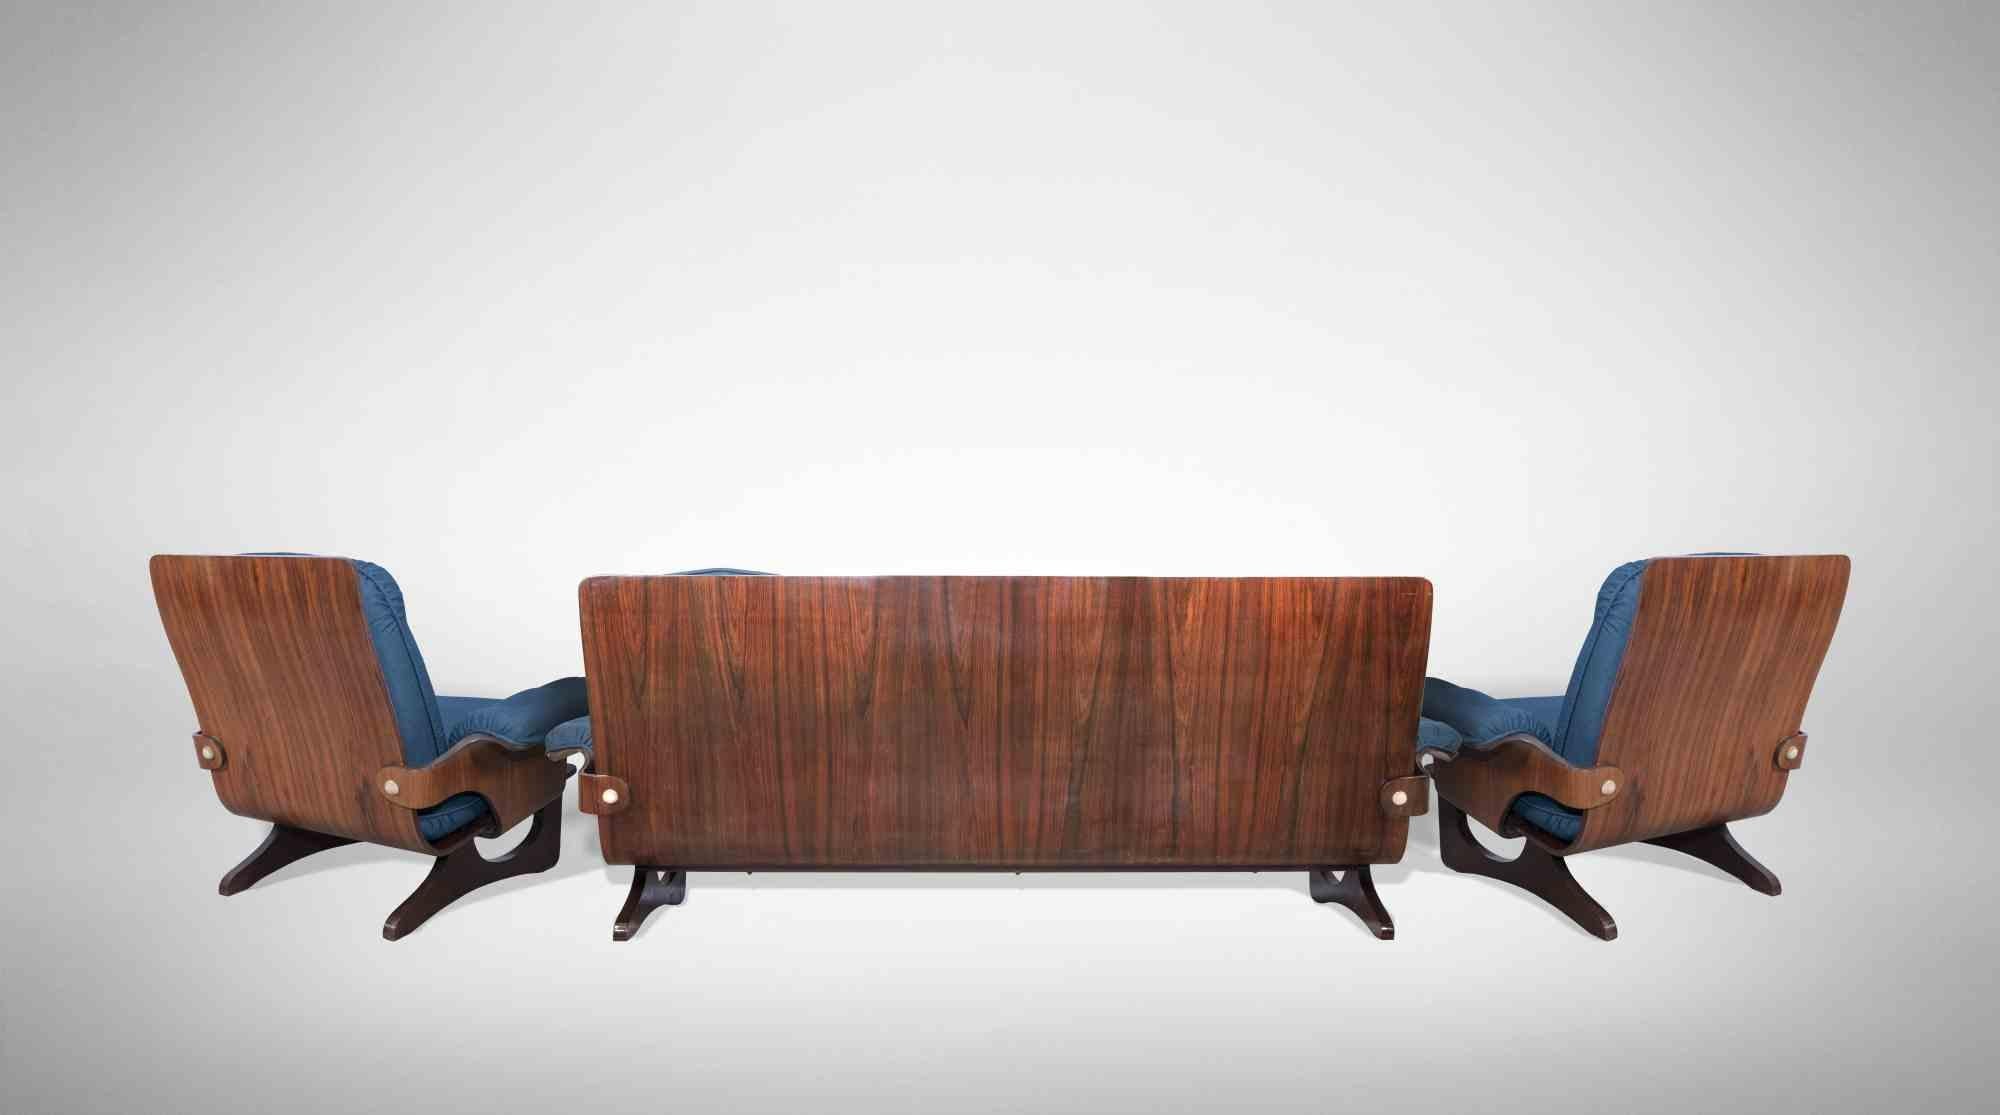 Vintage Sofa Set realized by Silvio Cavatorta in the Mid-20th century.

Top rare an impressive set of a sofa and a pair of armchairs realized in curved plywood veneered in rosewood and fabric.

Dimension of armchair: 75 x 80 x 90